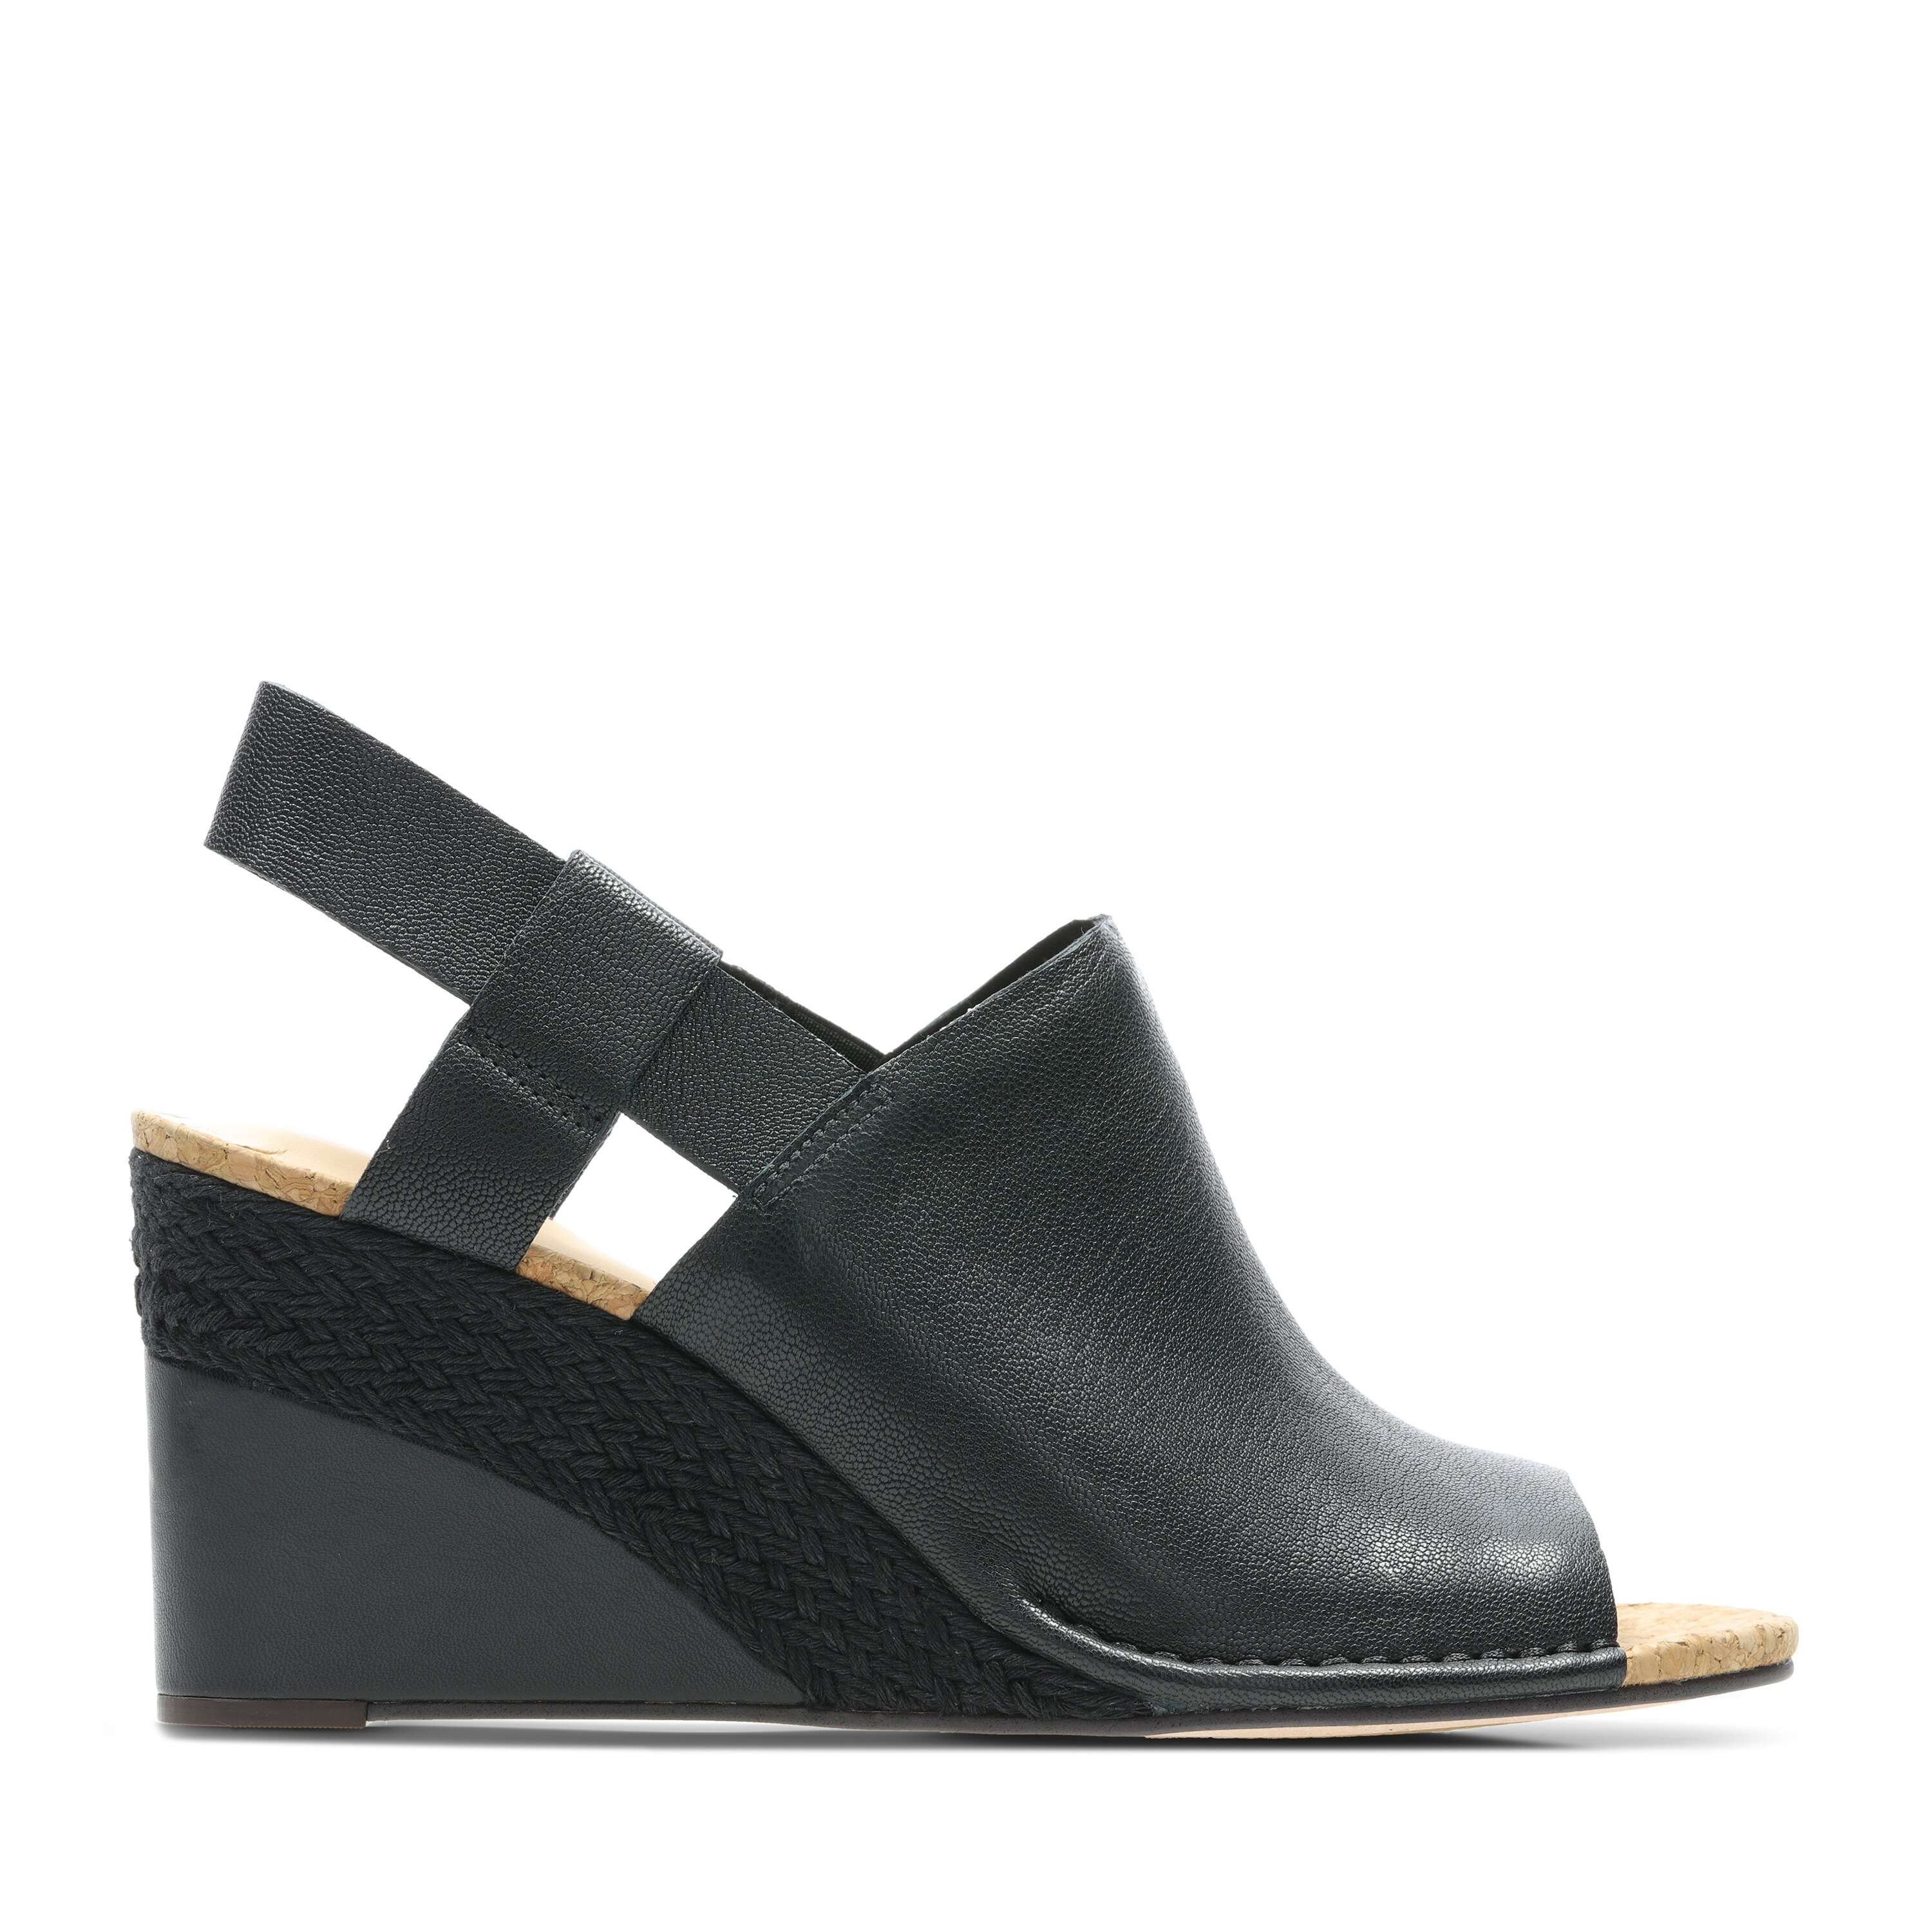 tsc.ca - Clarks Ladies Spiced Bay Wedge